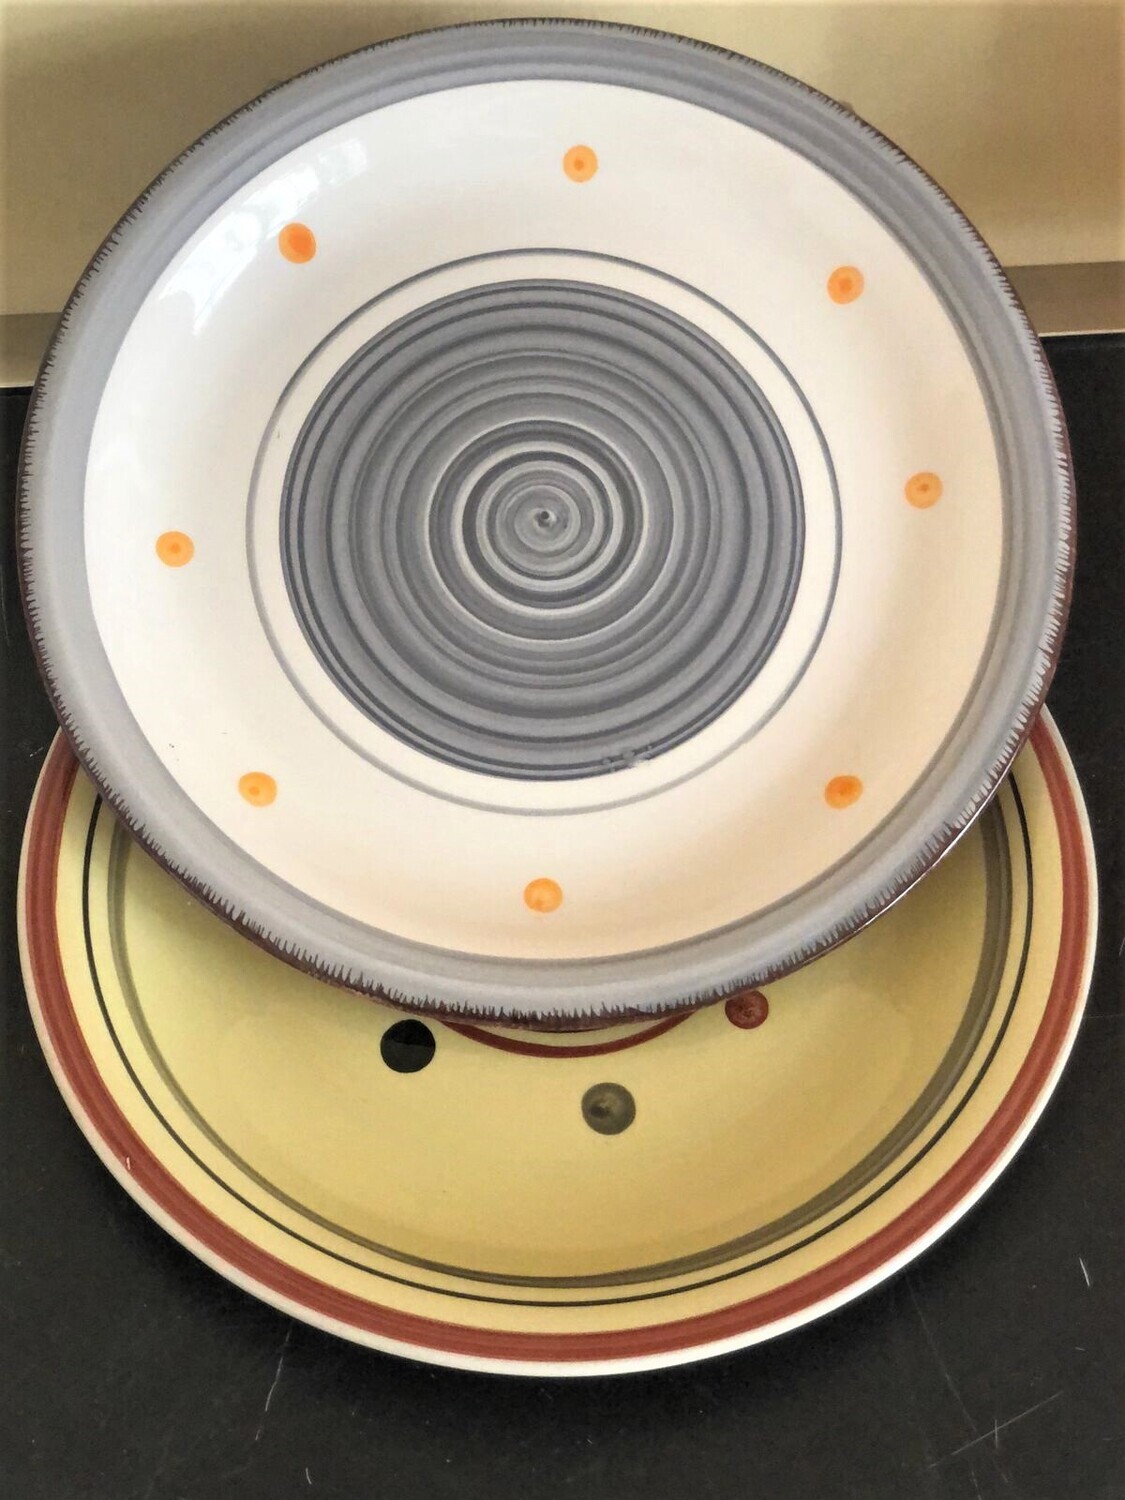 Spiral dotted Ceramic dinner plate set of 6,10.5inch#DS01/DS02